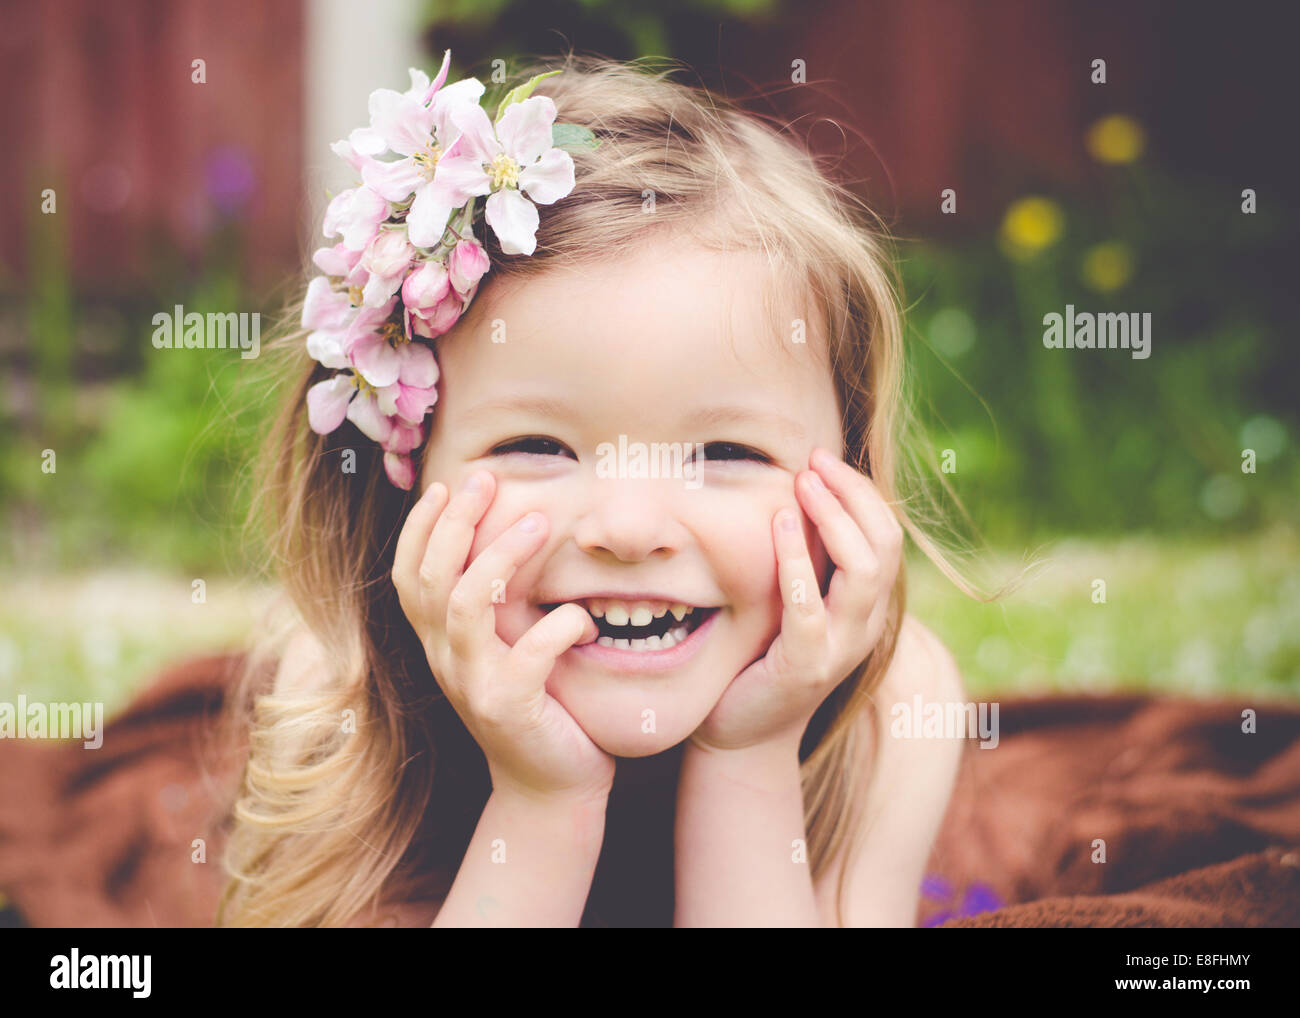 Portrait of a girl laughing Stock Photo